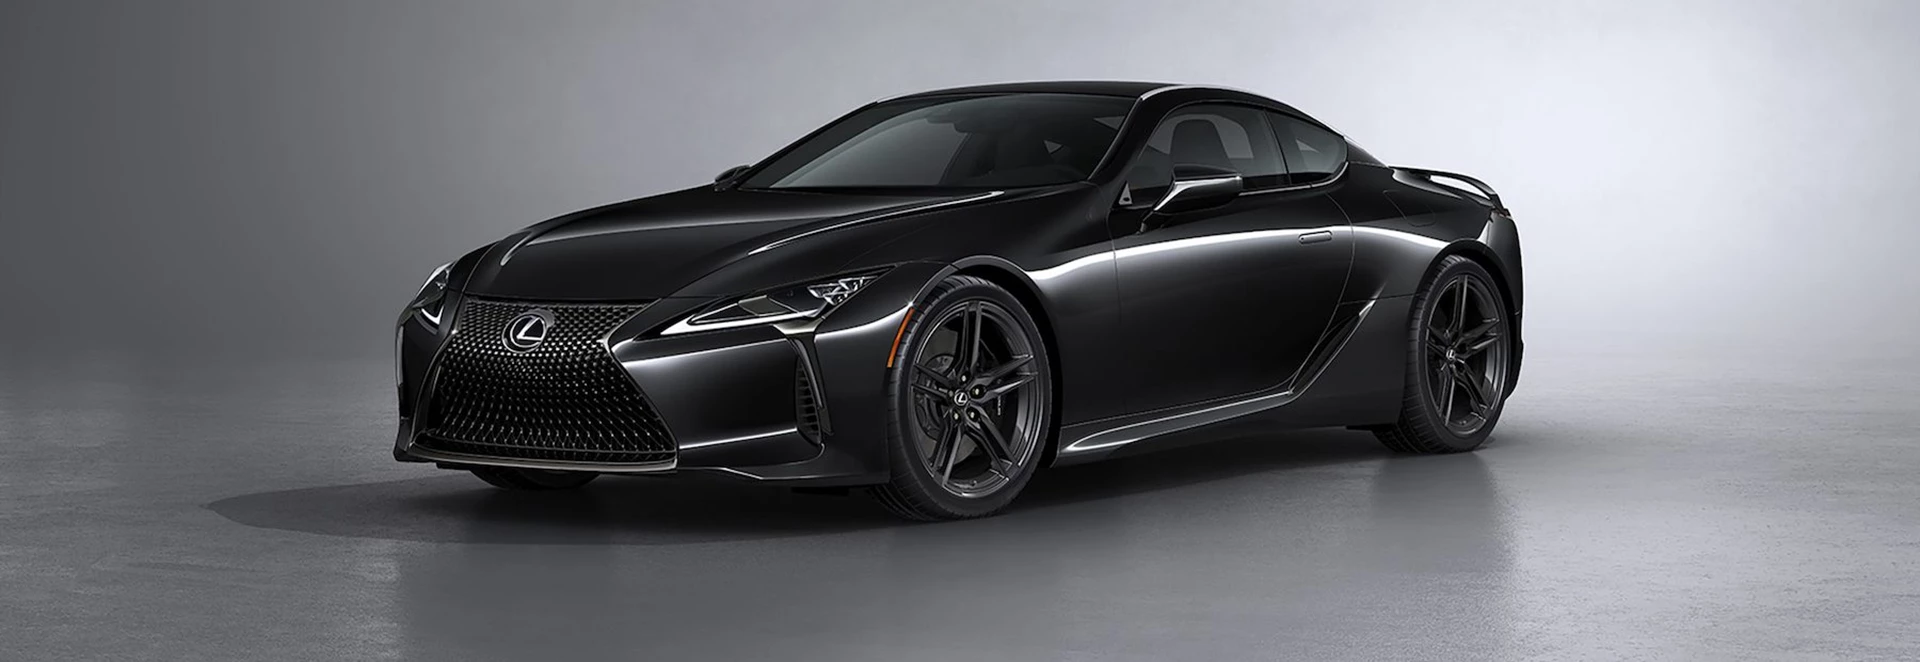 Flagship Lexus LC gets stealthier look as part of new Black Inspiration trim level 